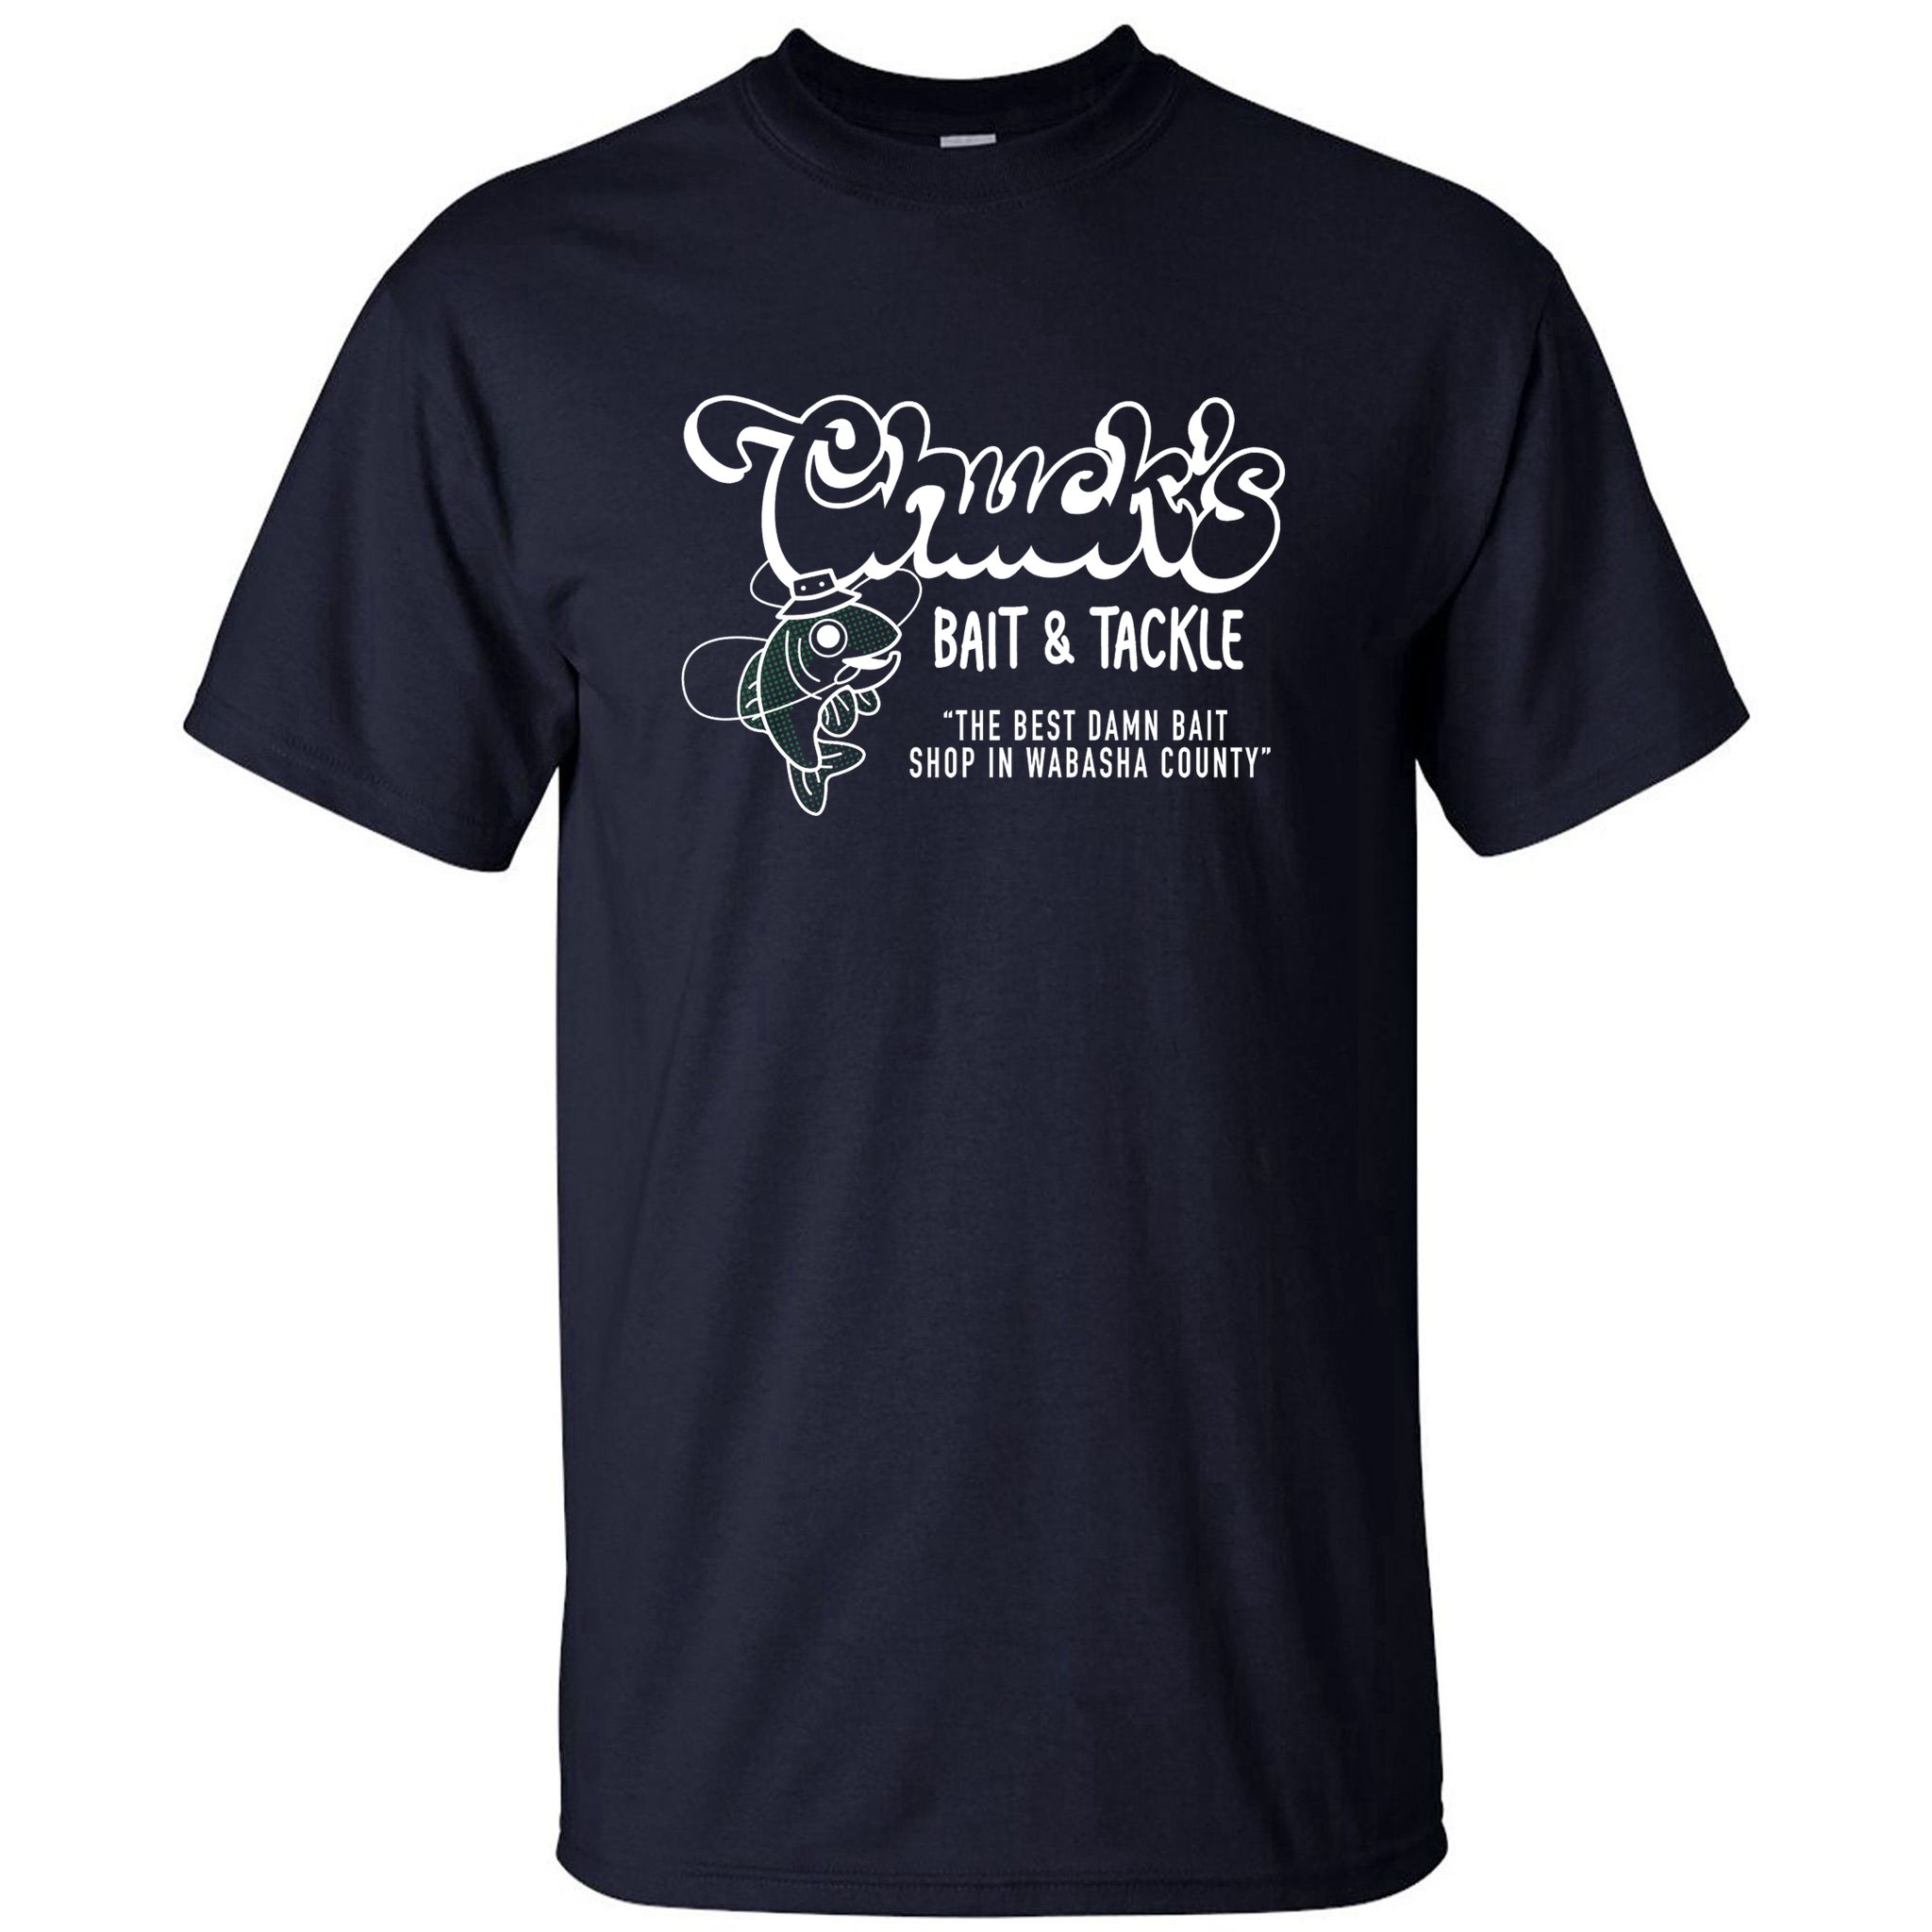 https://images3.teeshirtpalace.com/images/productImages/cbt8389509-chucks-bait--tackle-the-best-damn-bait-shop-in-wabsha-country-fishing-fathers--navy-att-garment.jpg